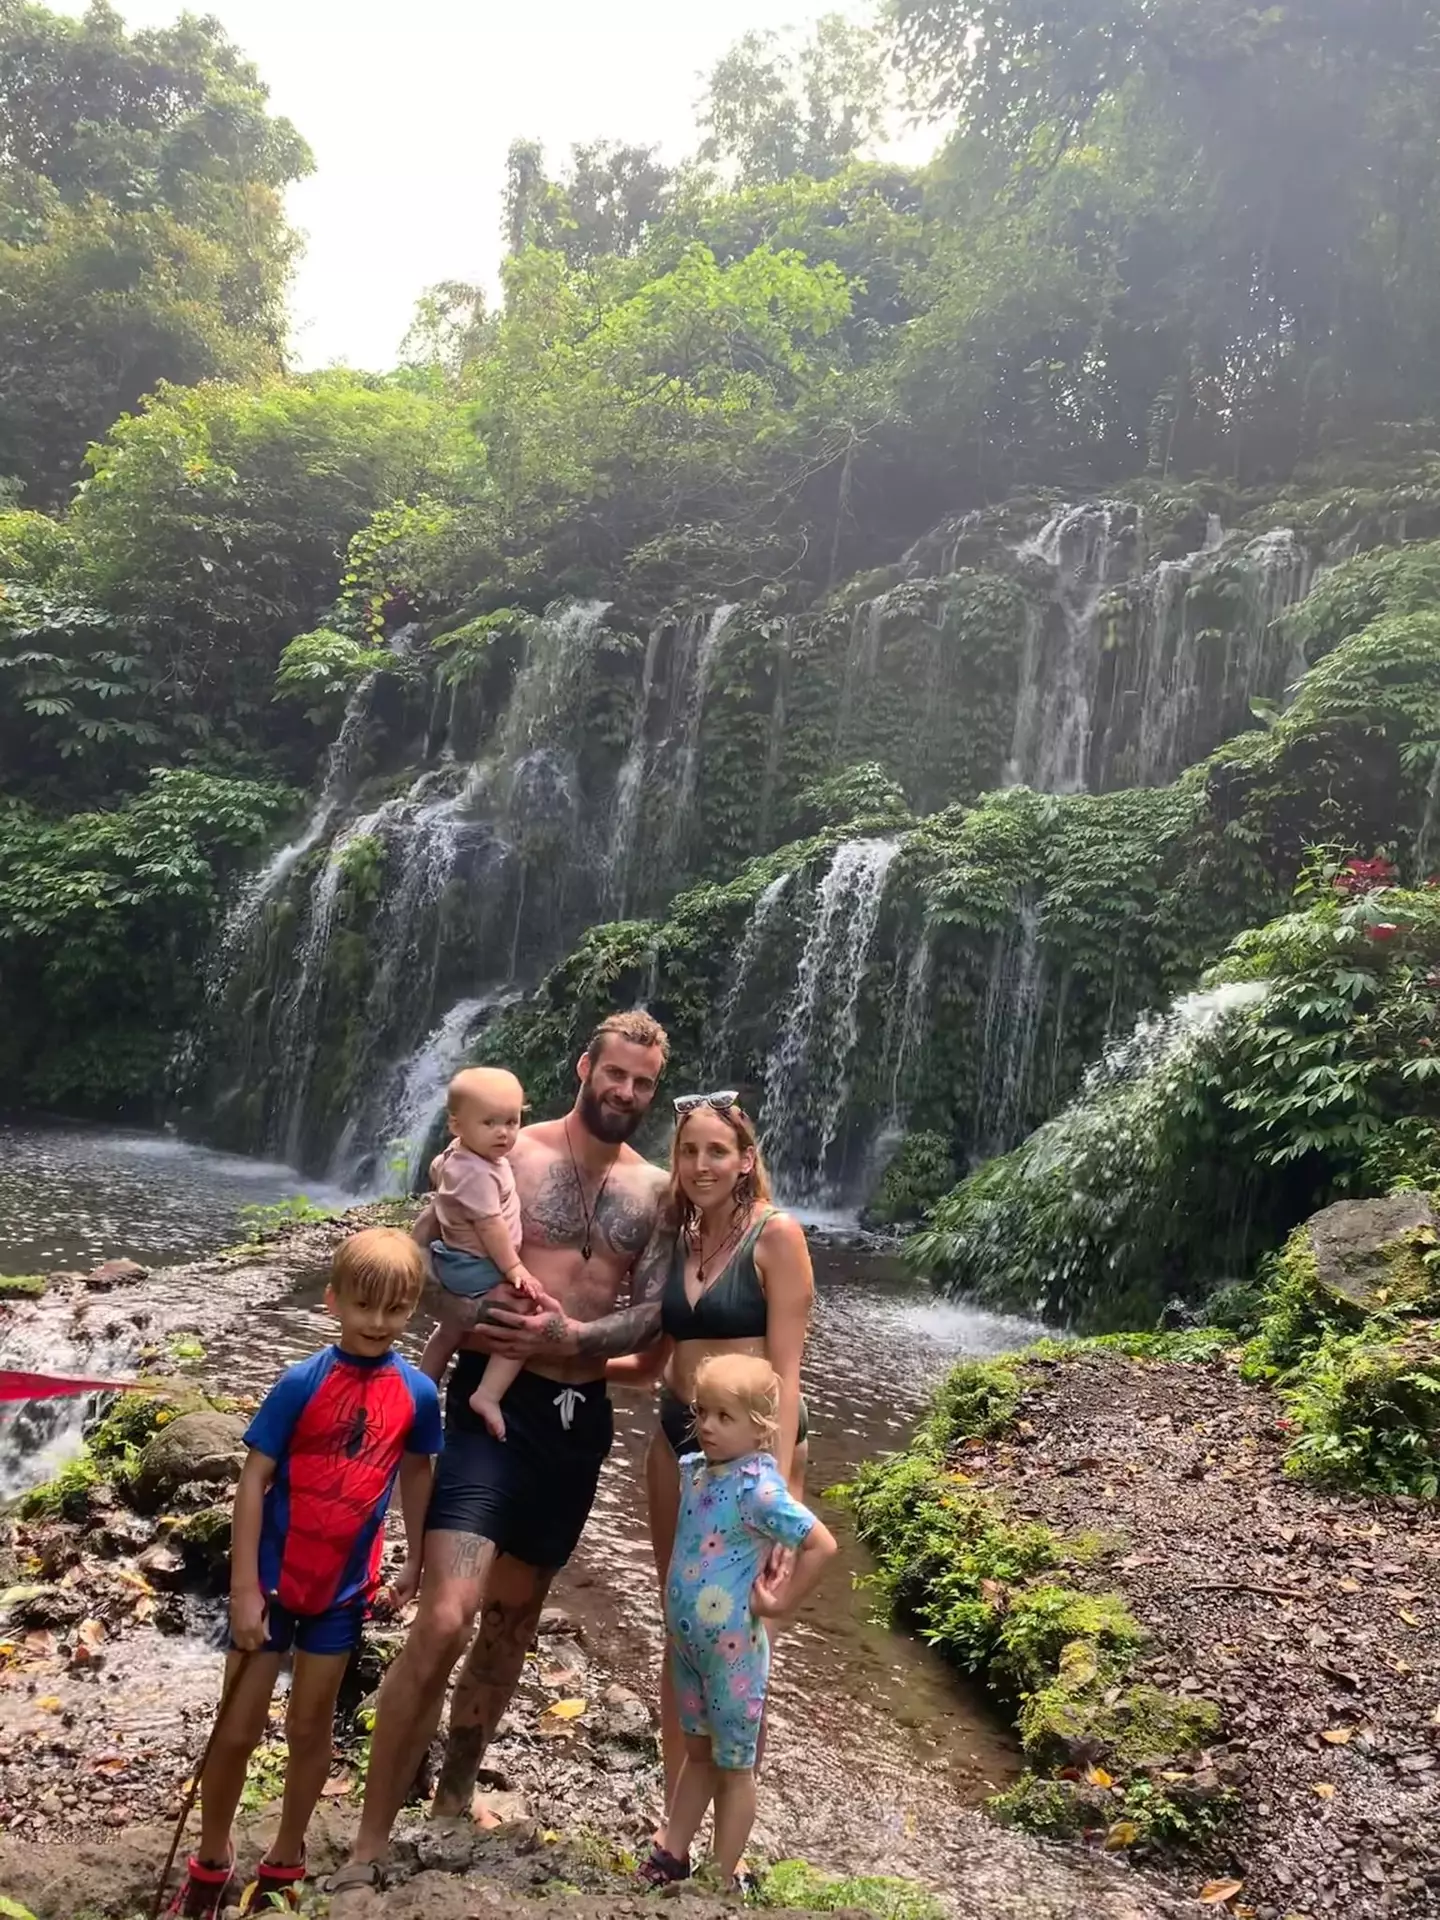 The family moved to Bali.